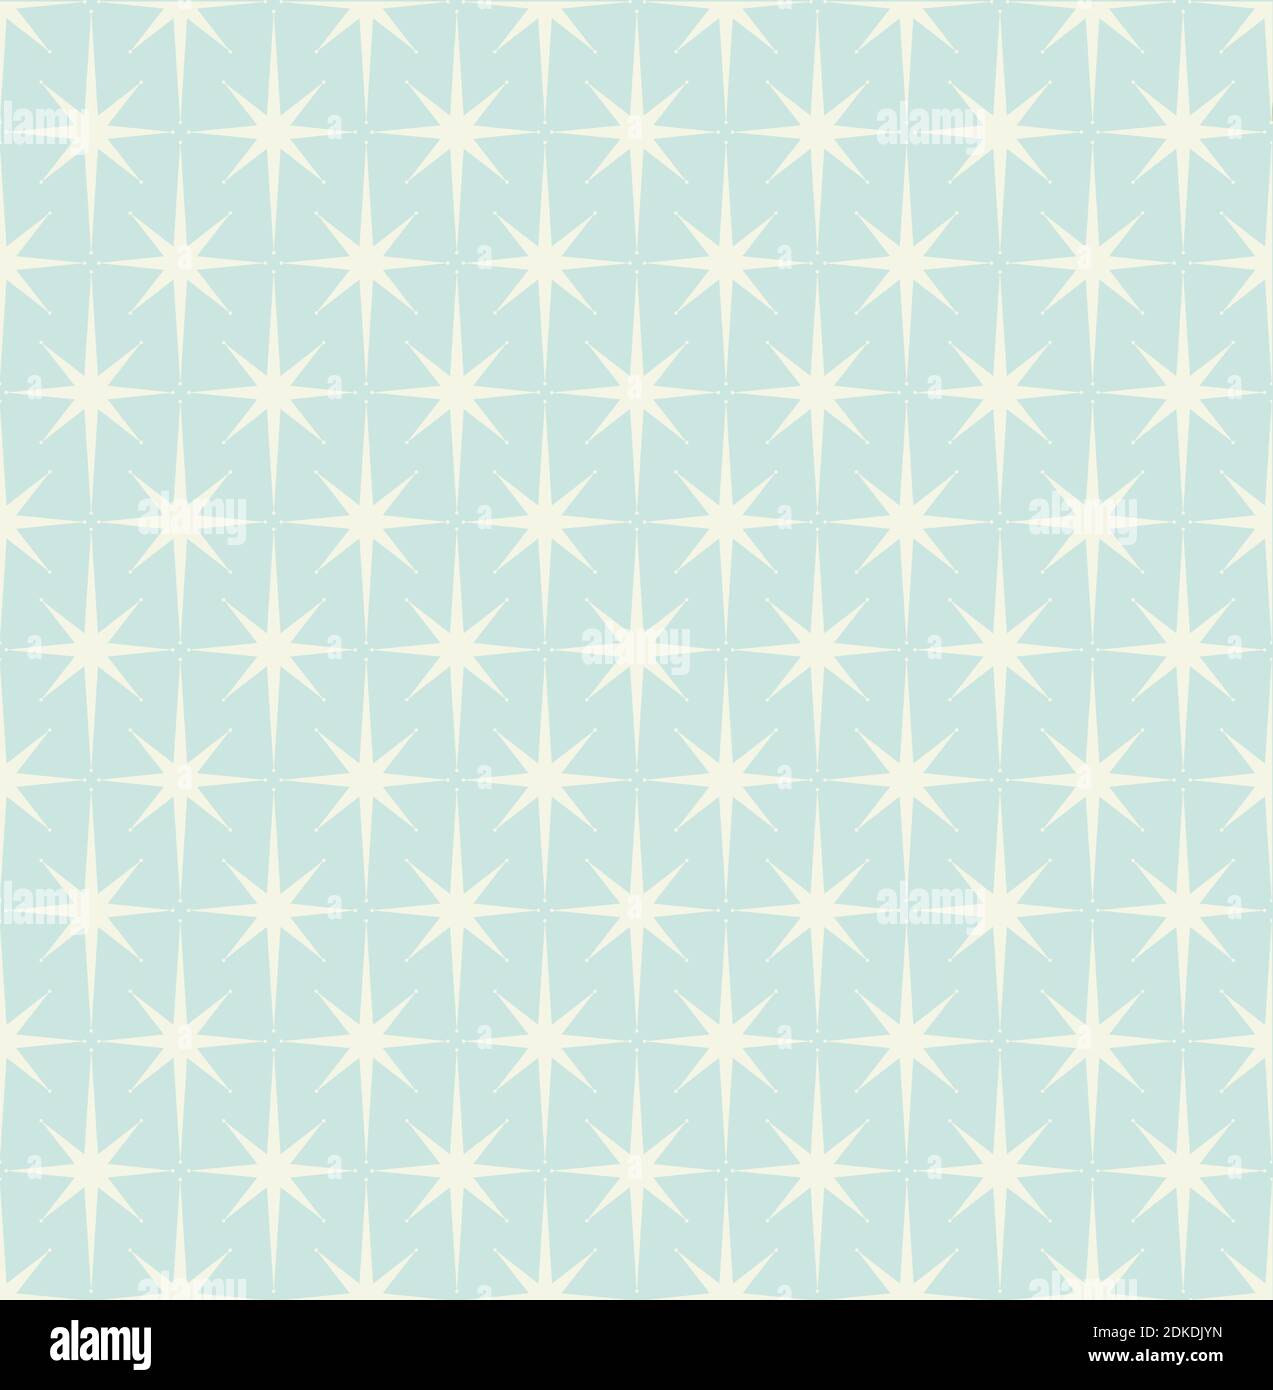 Mid-century modern wrapping paper in starburst pattern on light blue background. Inspired by Atomic era. Repeatable and seamless Stock Vector